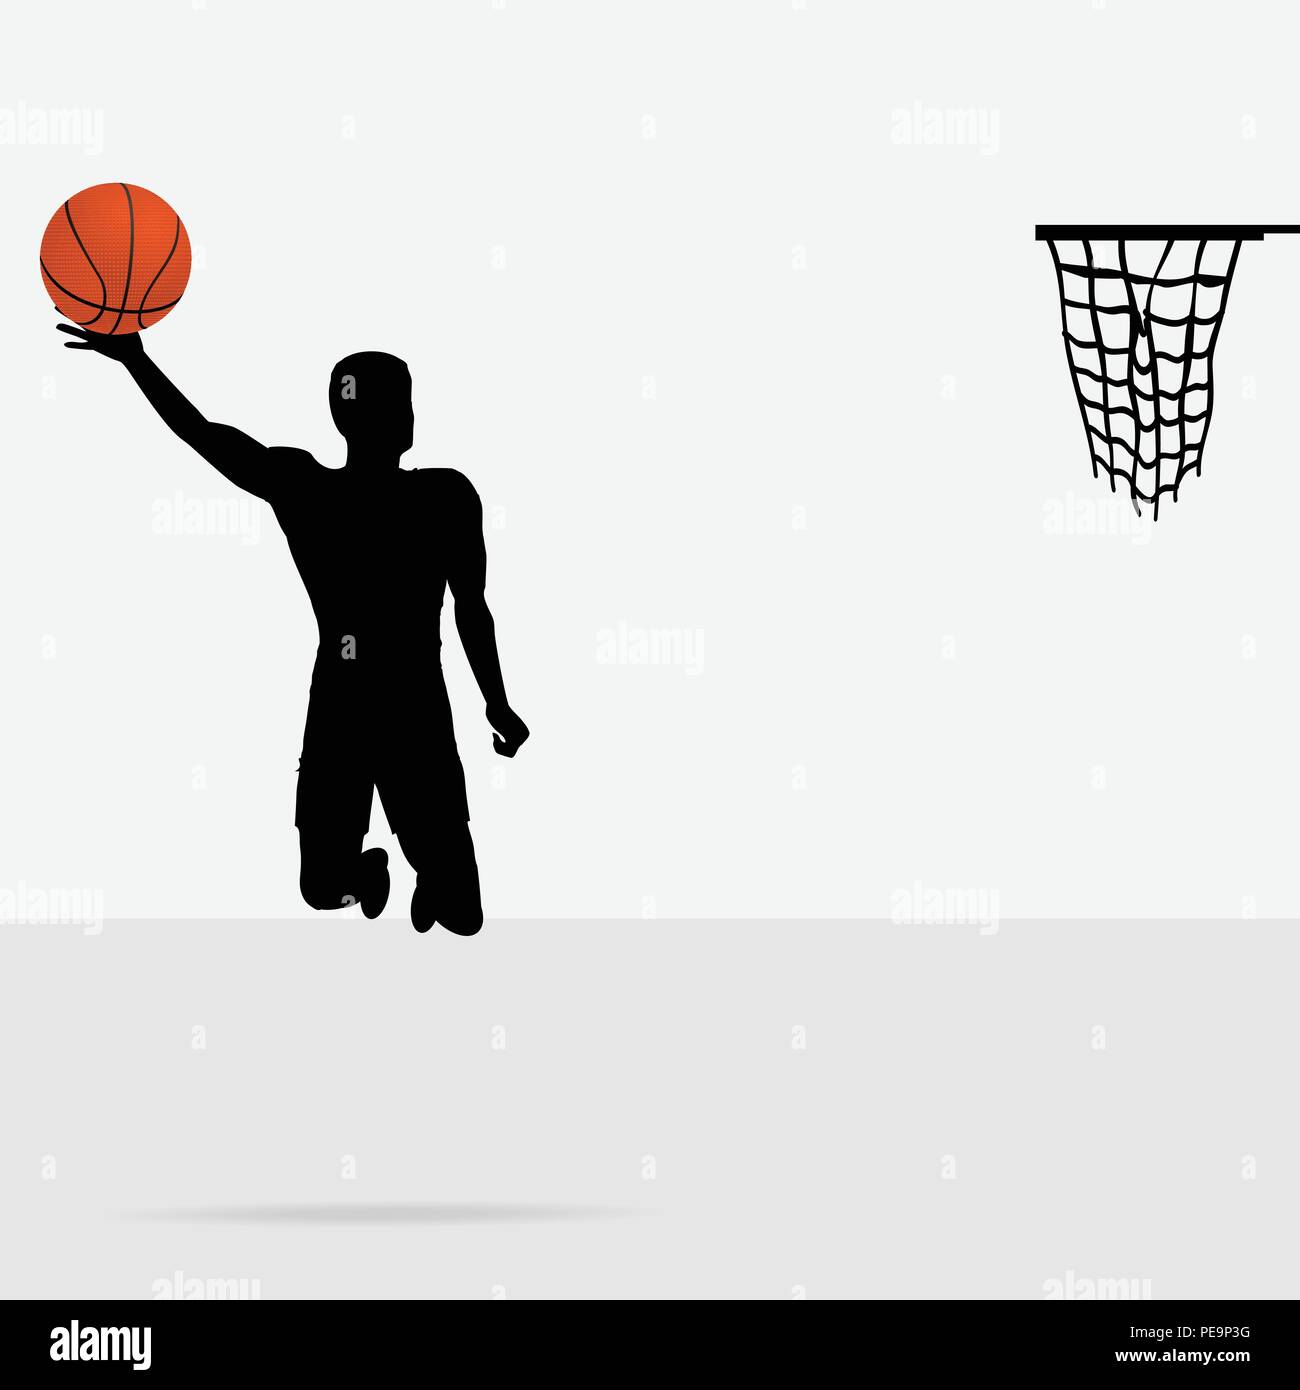 Silhouette of a Basketball Player Jumping to Score with Detailed Ball Stock Vector